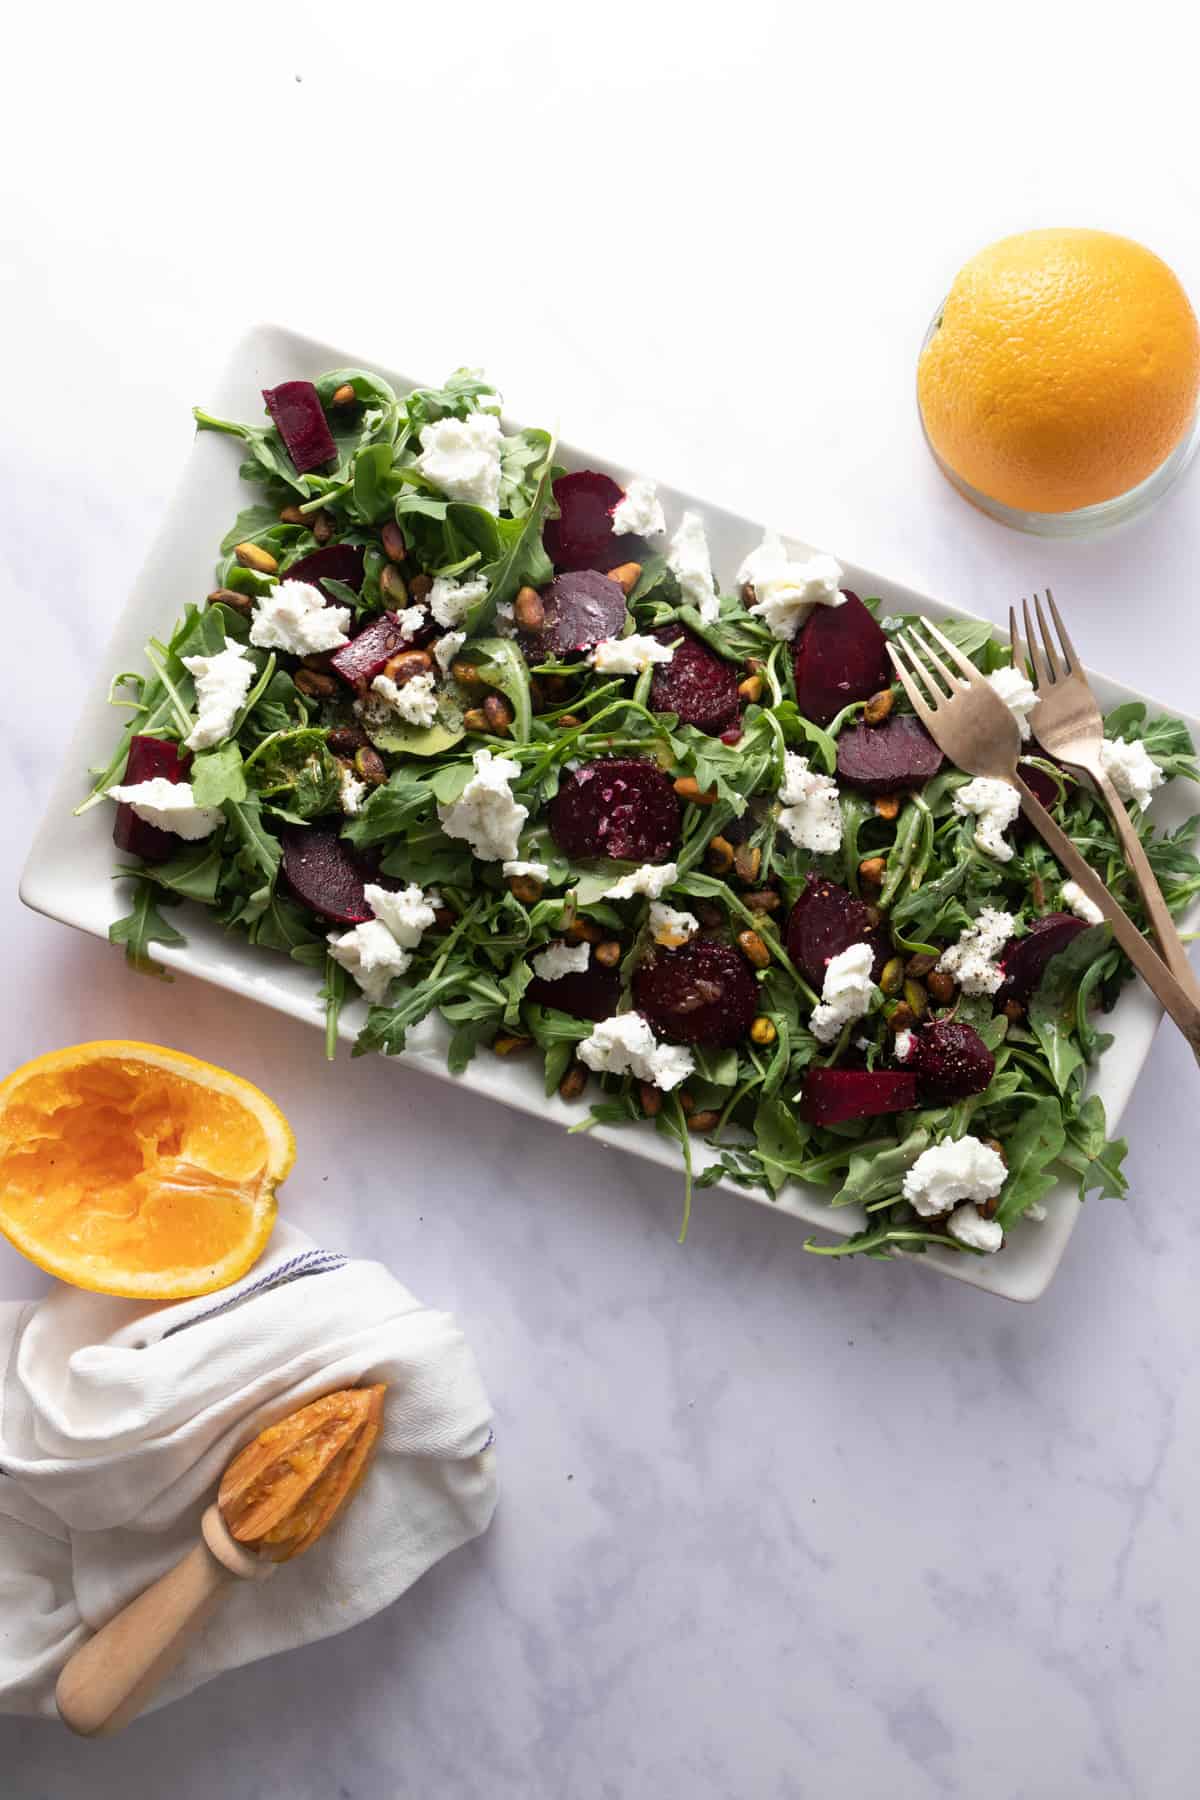 Platter with roasted beets, arugula, goat cheese and pistachios